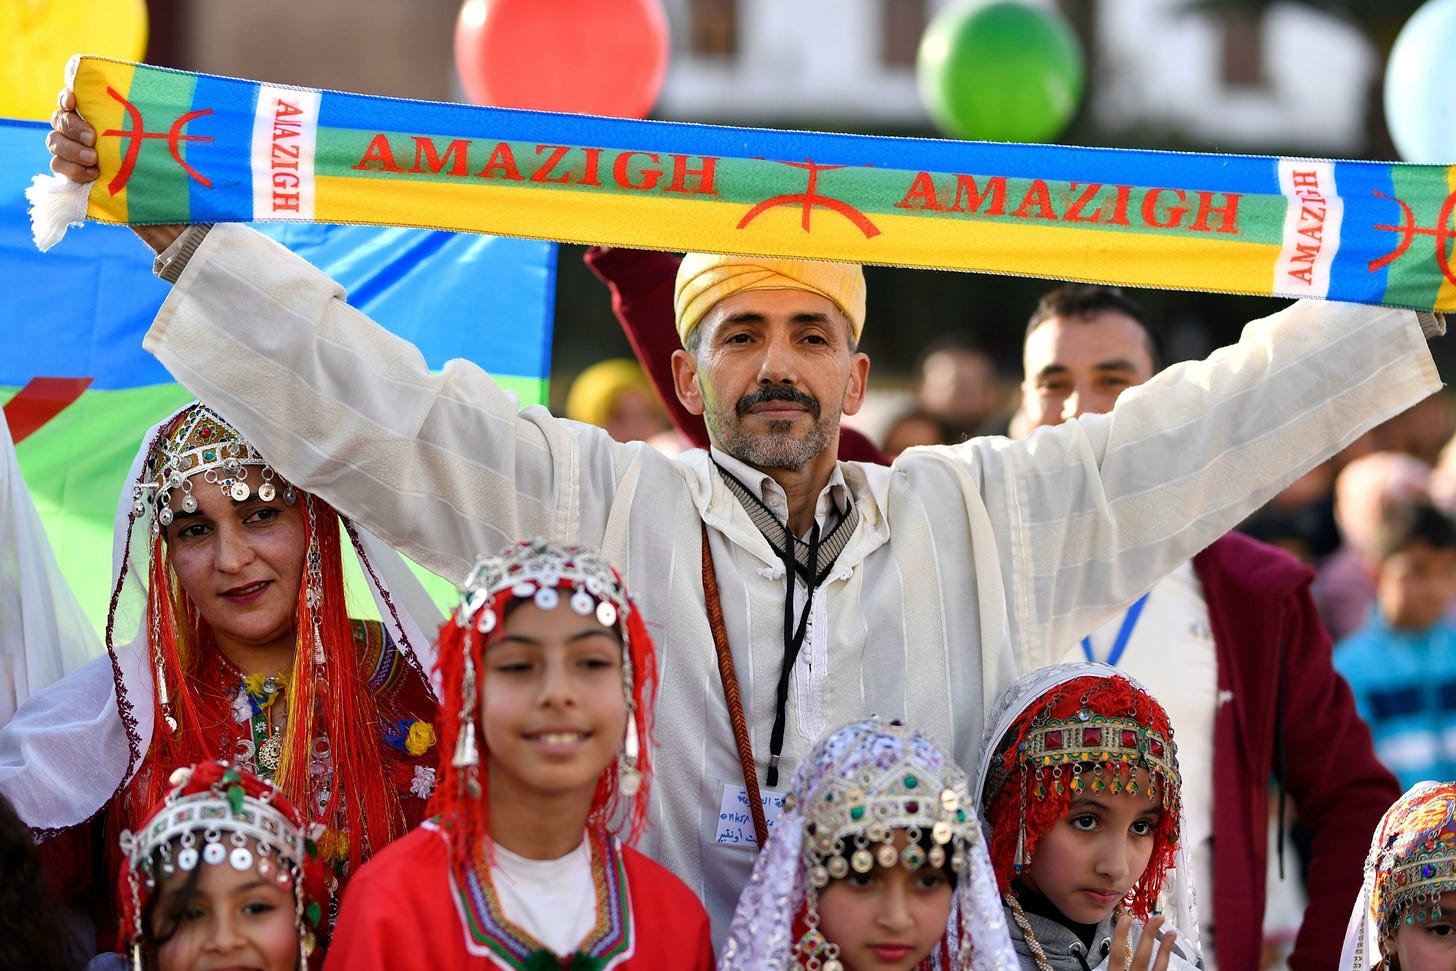 Amazigh New Year in Morocco: a milestone for indigenous rights? - Minority  Rights Group